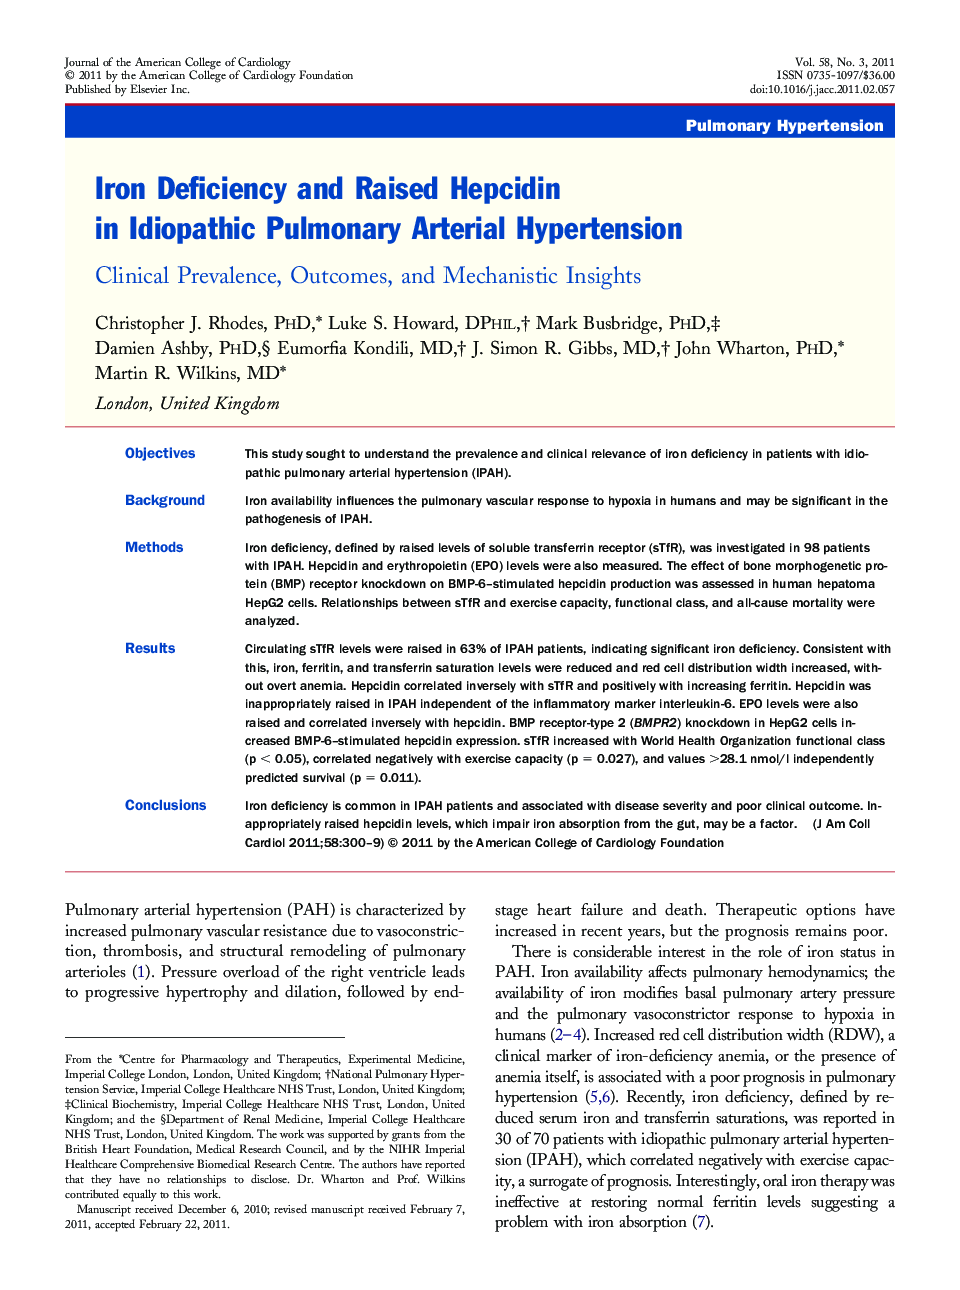 Iron Deficiency and Raised Hepcidin in Idiopathic Pulmonary Arterial Hypertension : Clinical Prevalence, Outcomes, and Mechanistic Insights